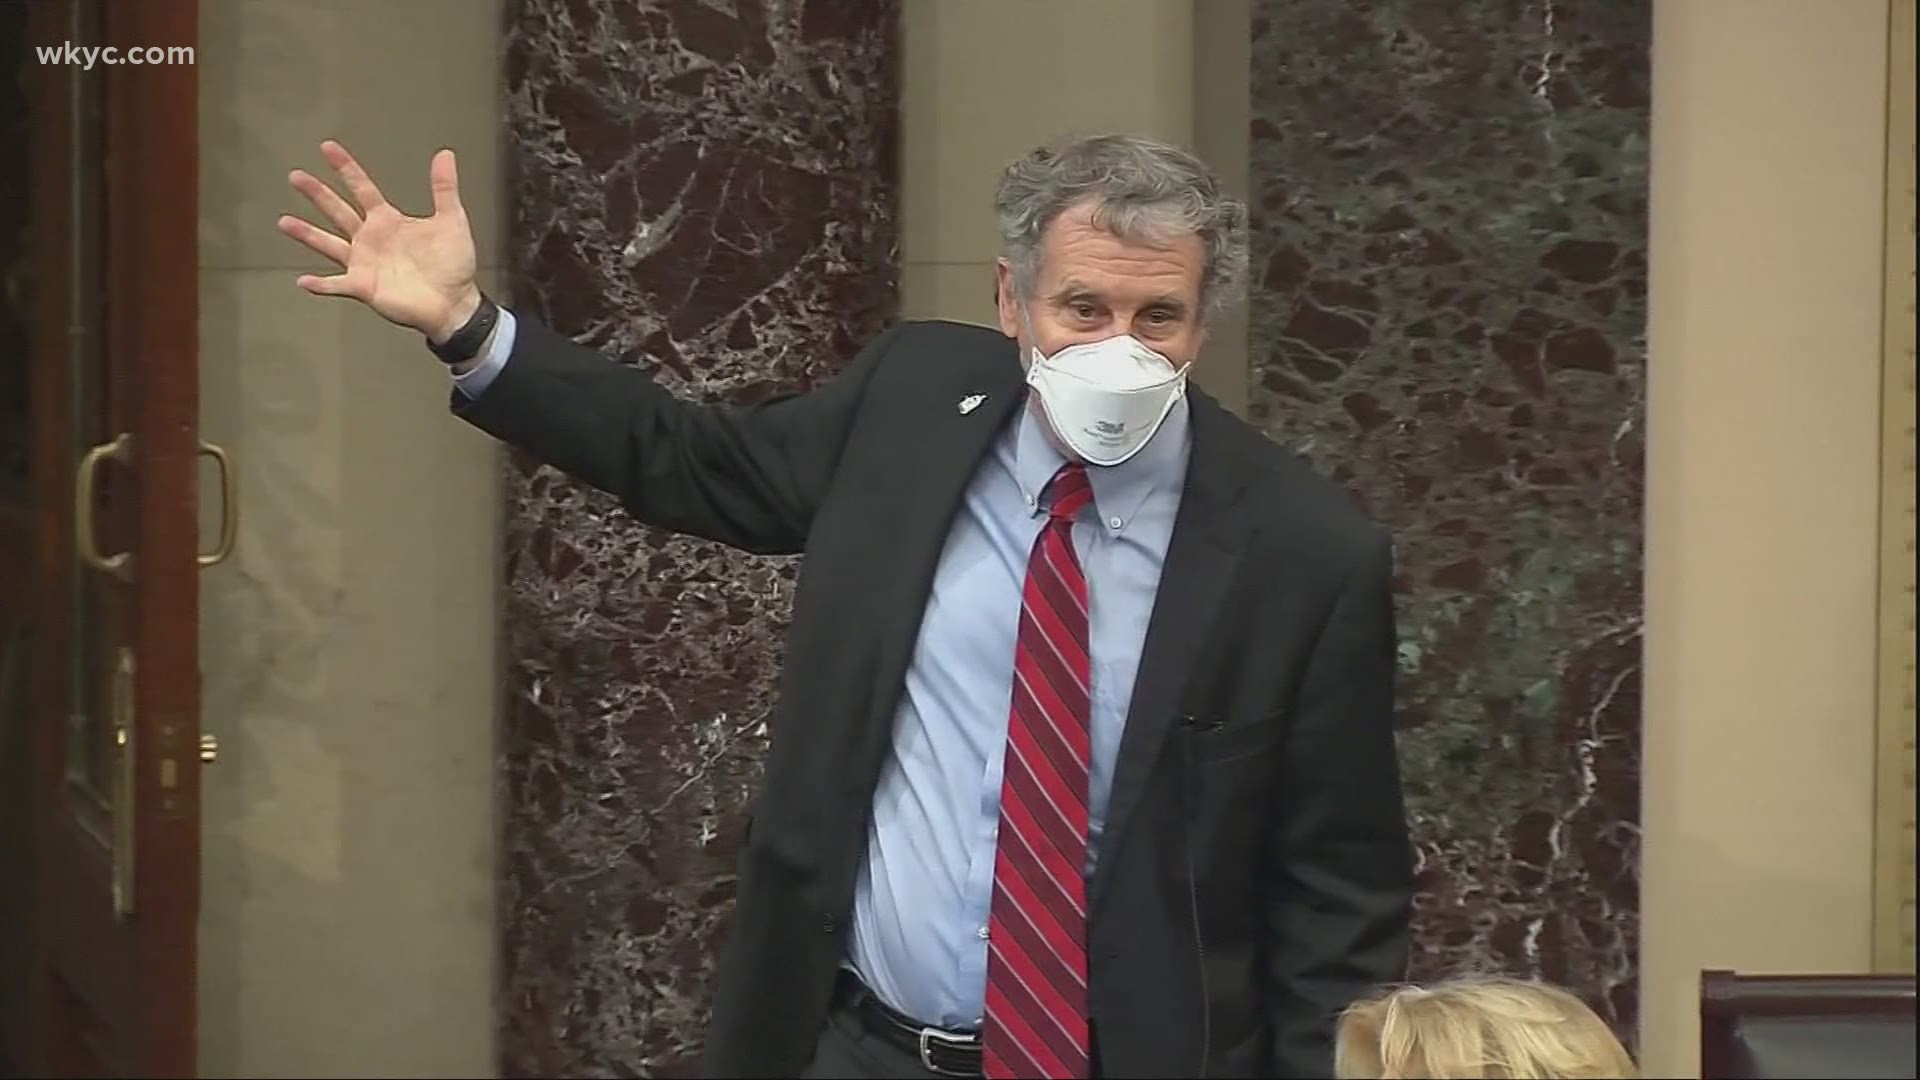 Sherrod Brown came out swinging as he called out Rand Paul for not wearing a mask on the Senate floor. Paul says he's immune after contracting COVID-19 last year.